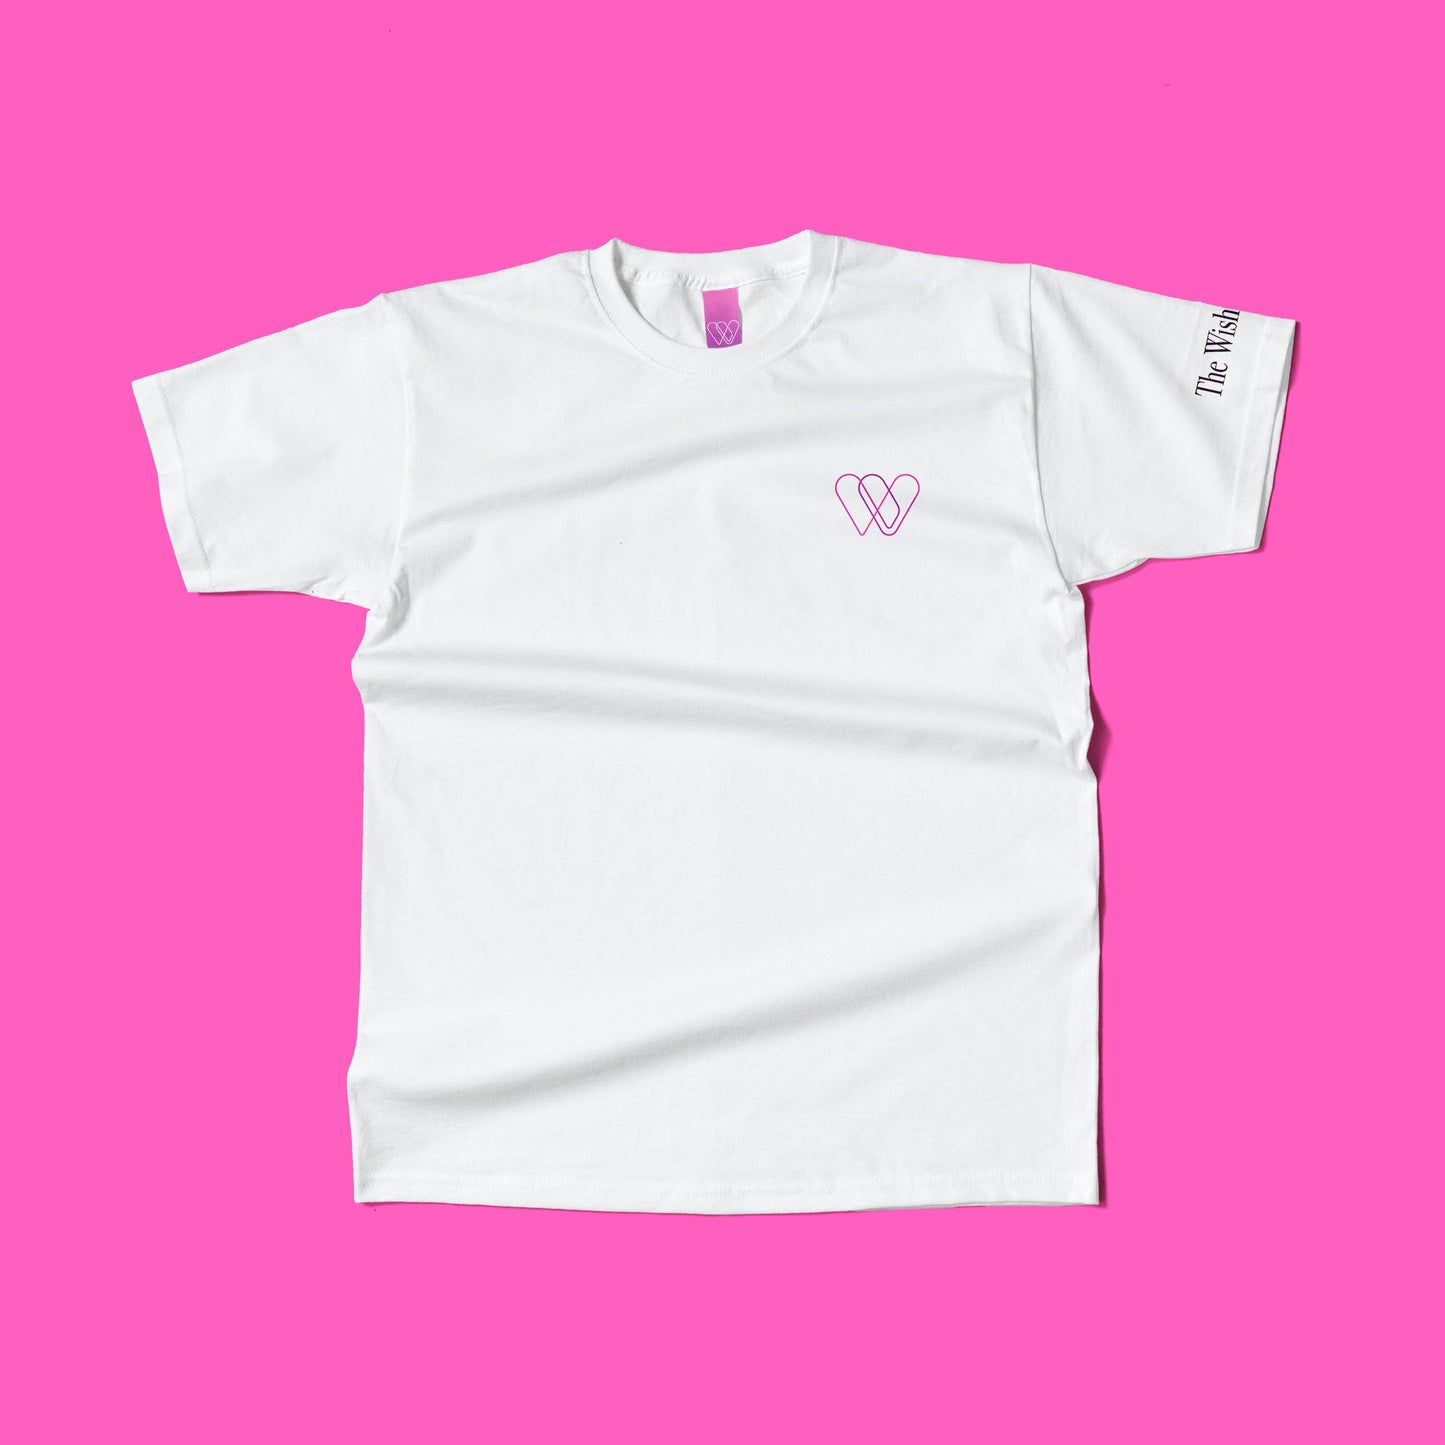 The Wishes Company - Short sleeve t-shirt